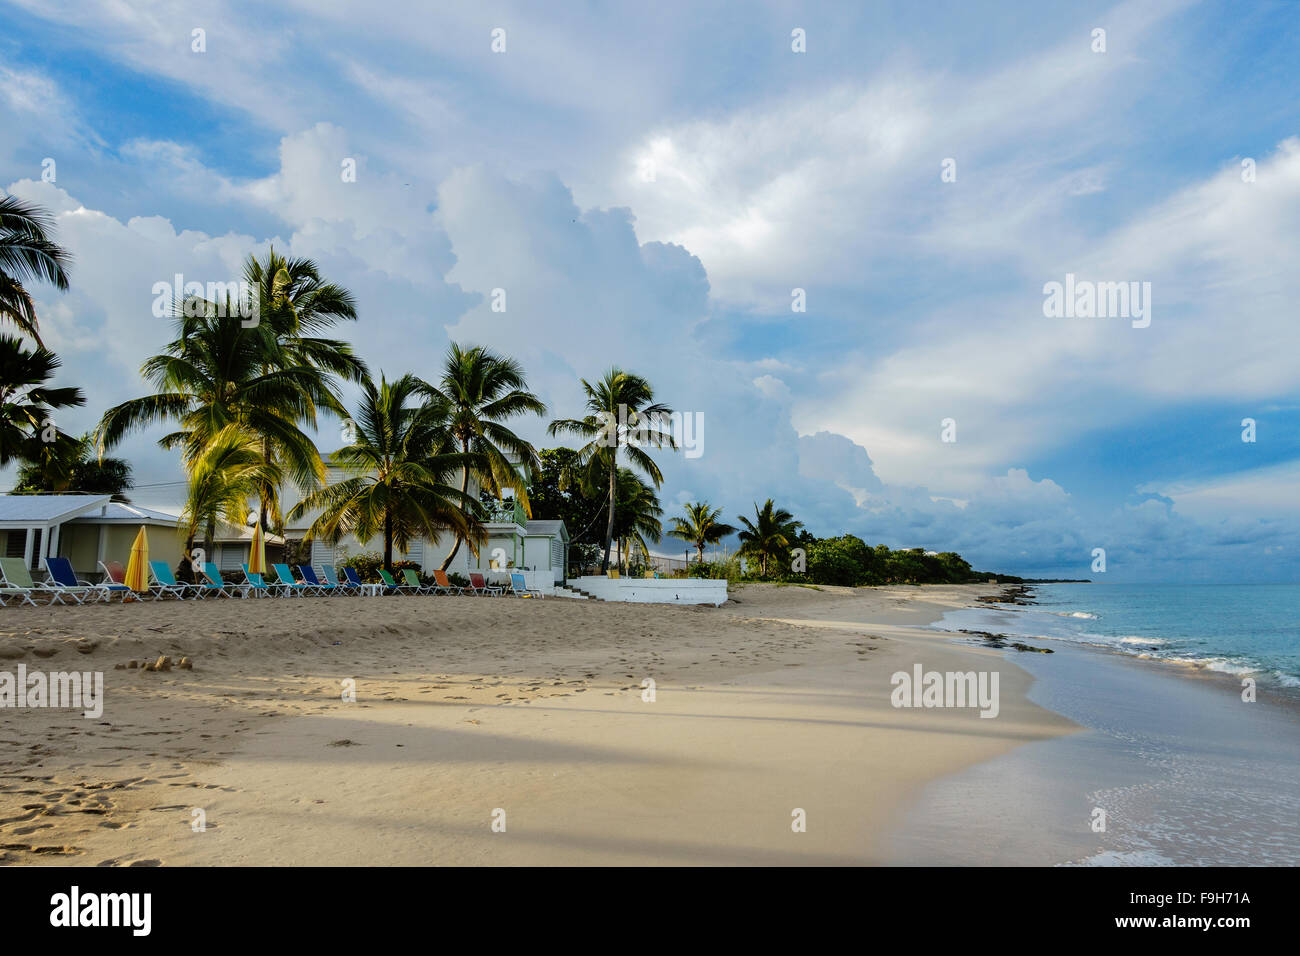 A view of a beachside resort, Cottages By The Sea, at sunrise, St. Croix, U.S. Virgin Islands. Showing the beach and sea. Cottages by the Sea resort. Stock Photo